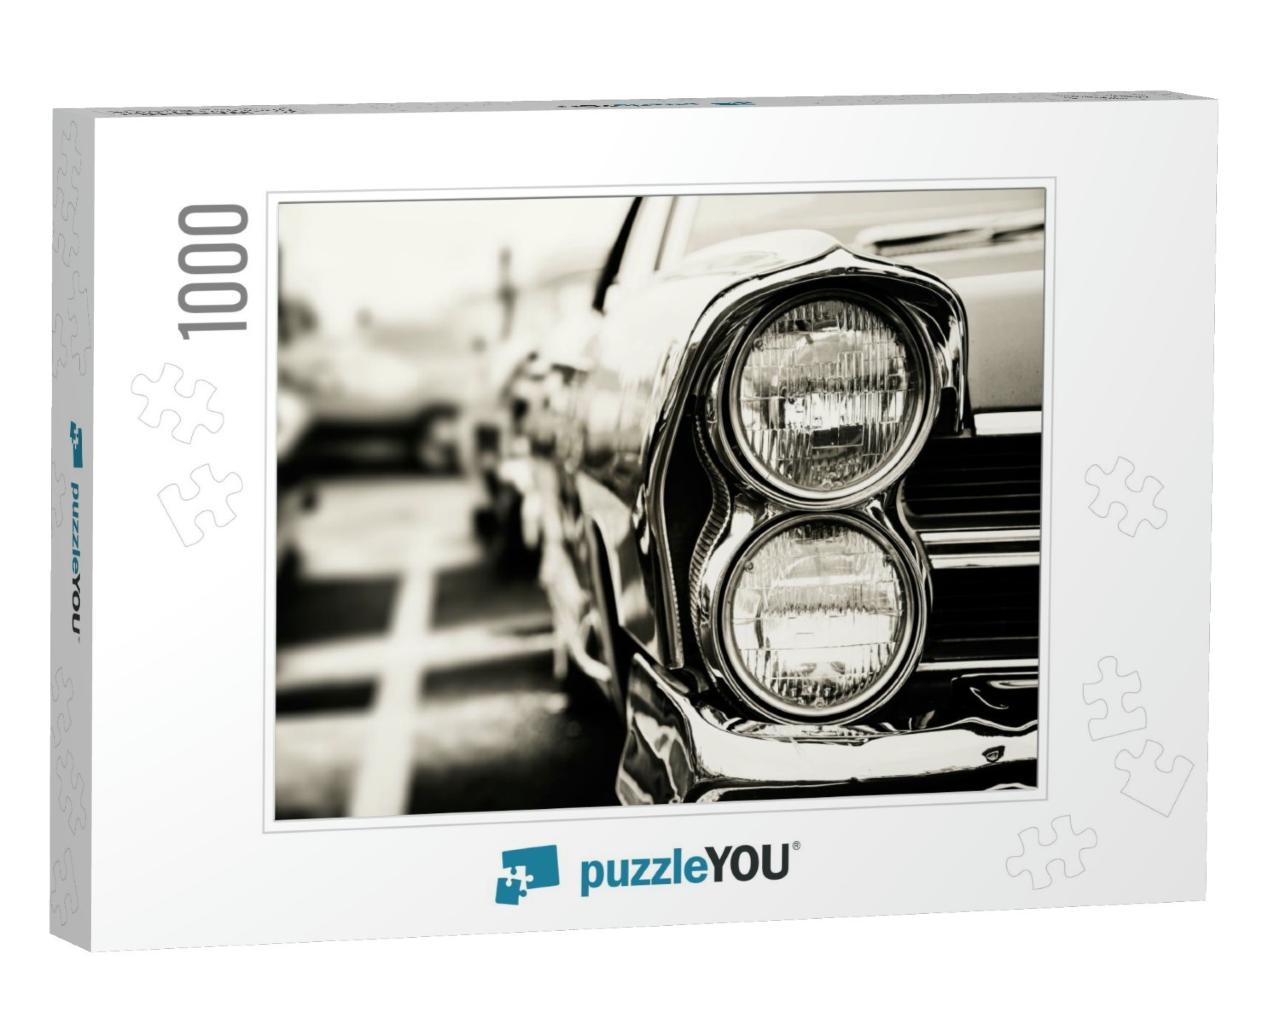 Classic Car with Close-Up on Headlights... Jigsaw Puzzle with 1000 pieces